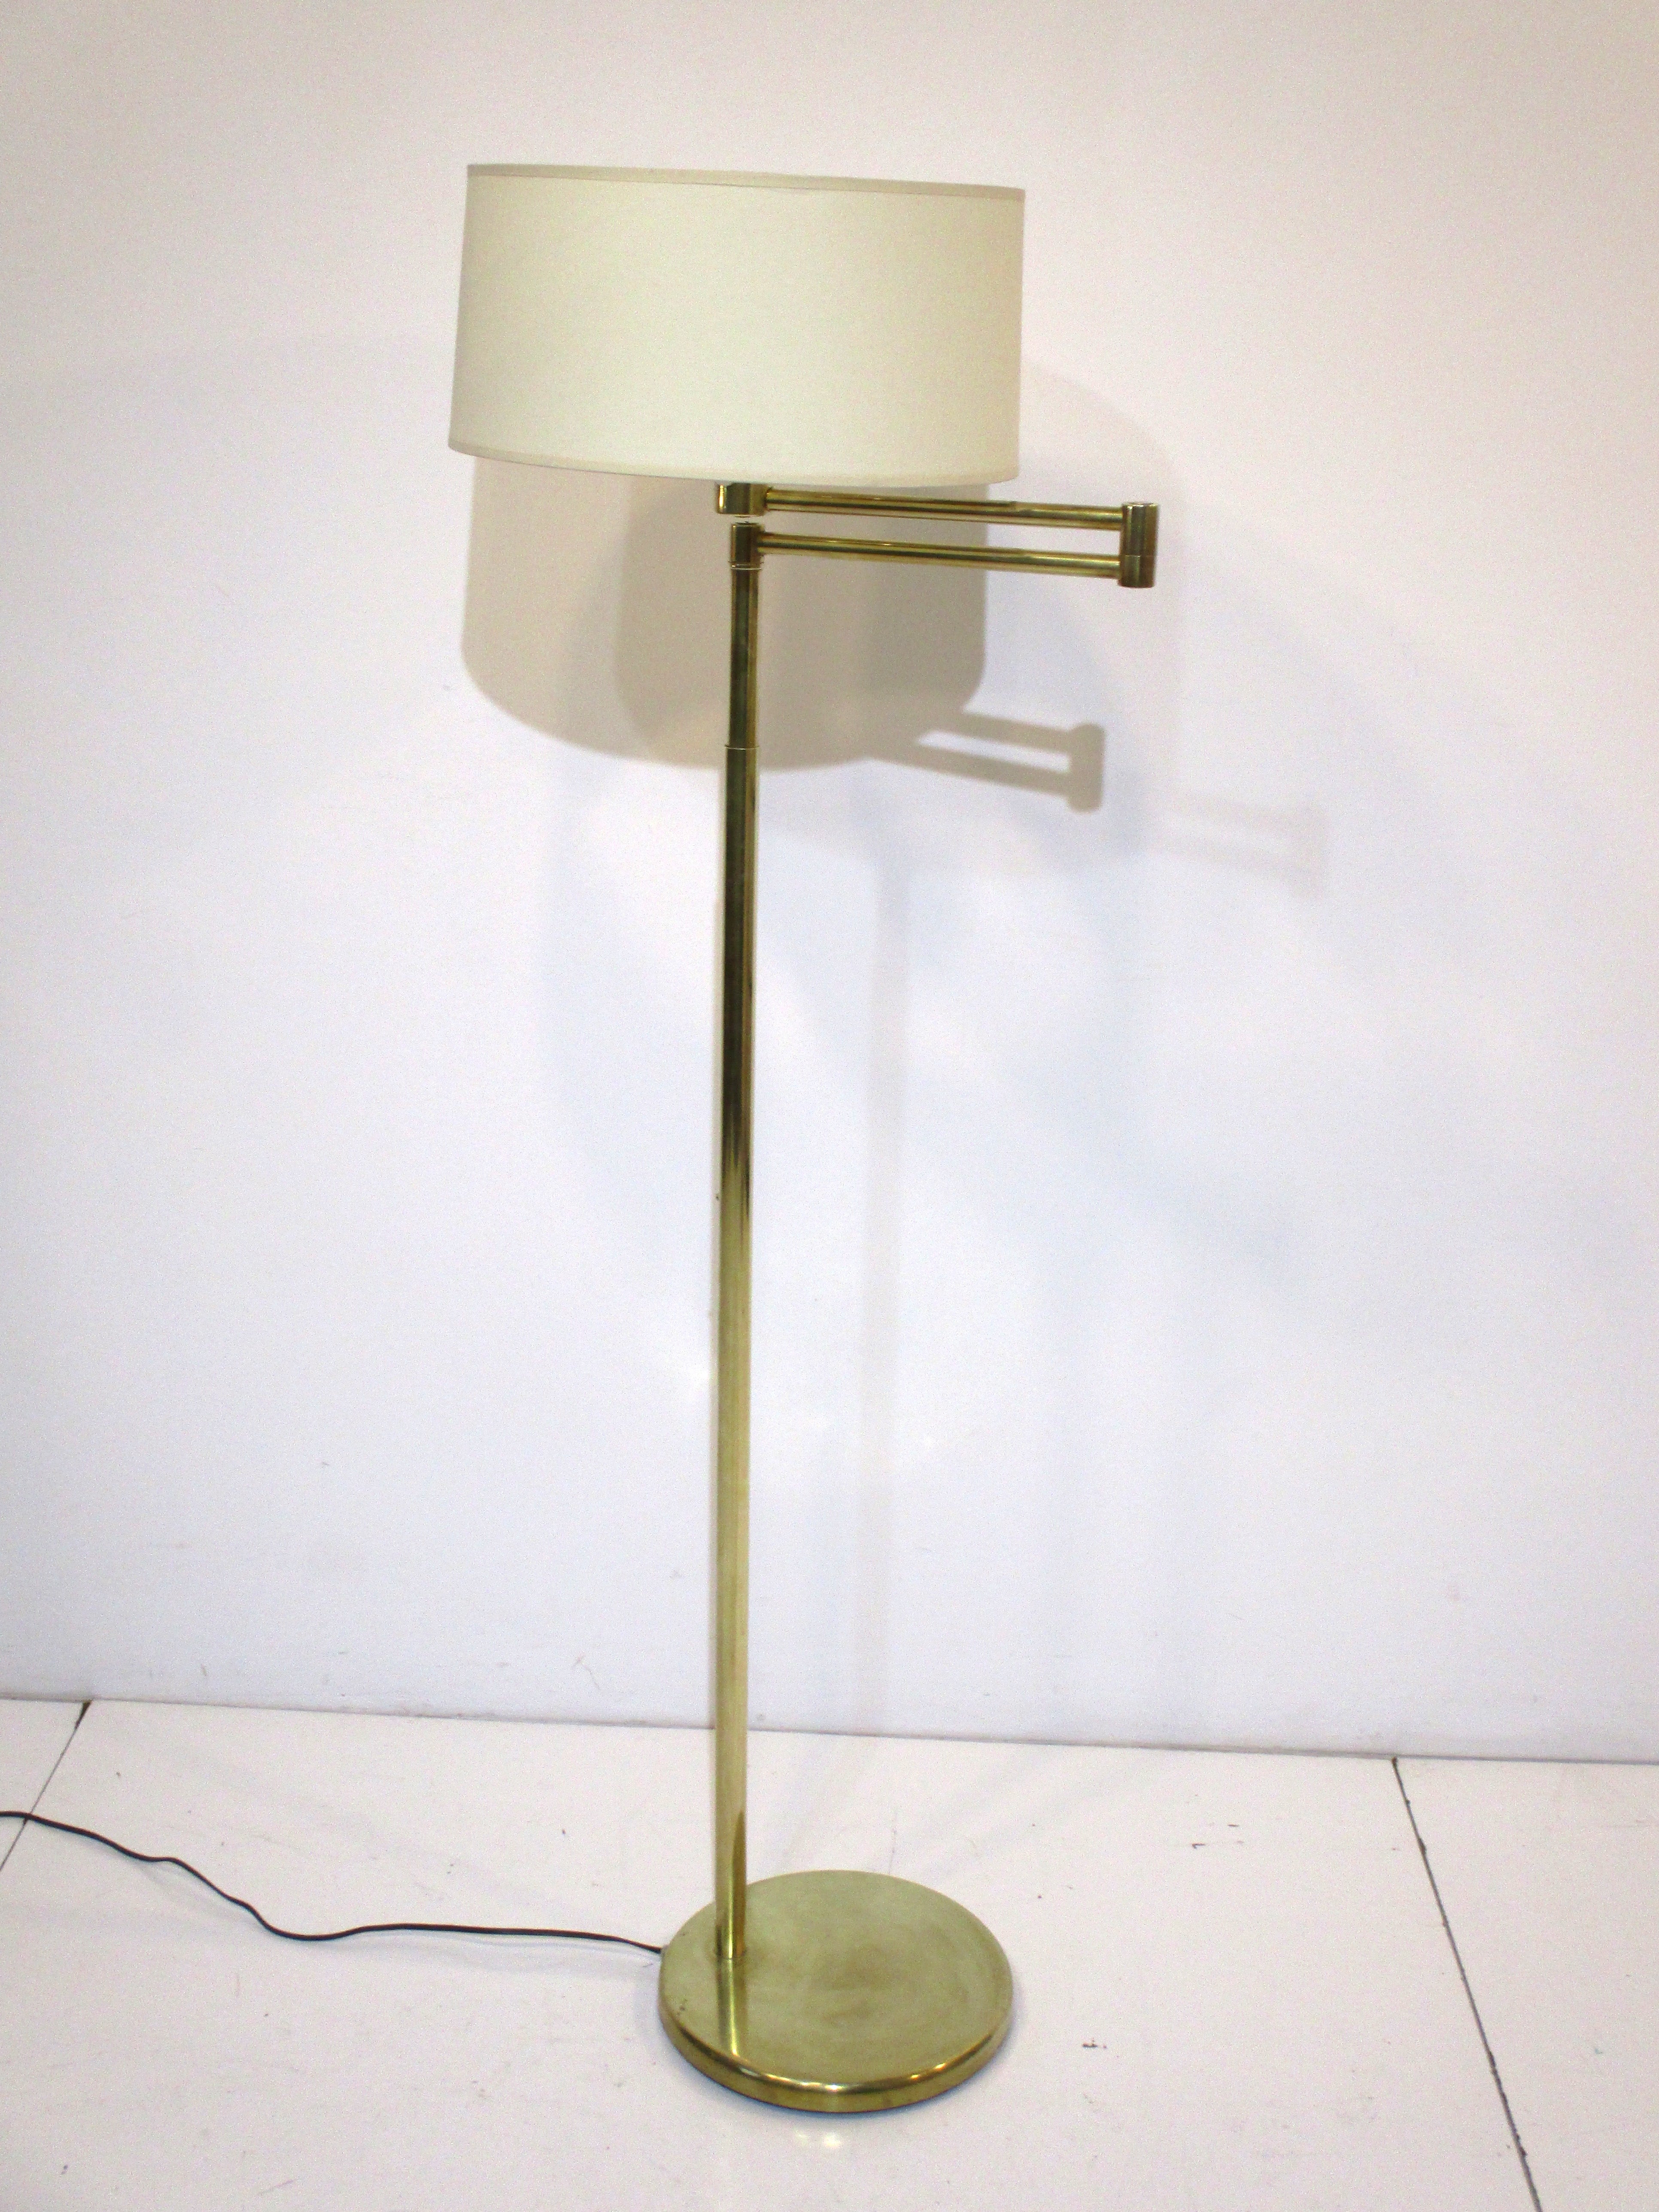 A very nice brass swing arm floor lamp topped with the original milk glass defusser and cream colored round linen shade . Manufactured by the Nessen Lighting Company NY known for their high quality and superior materials this lamp is a design icon